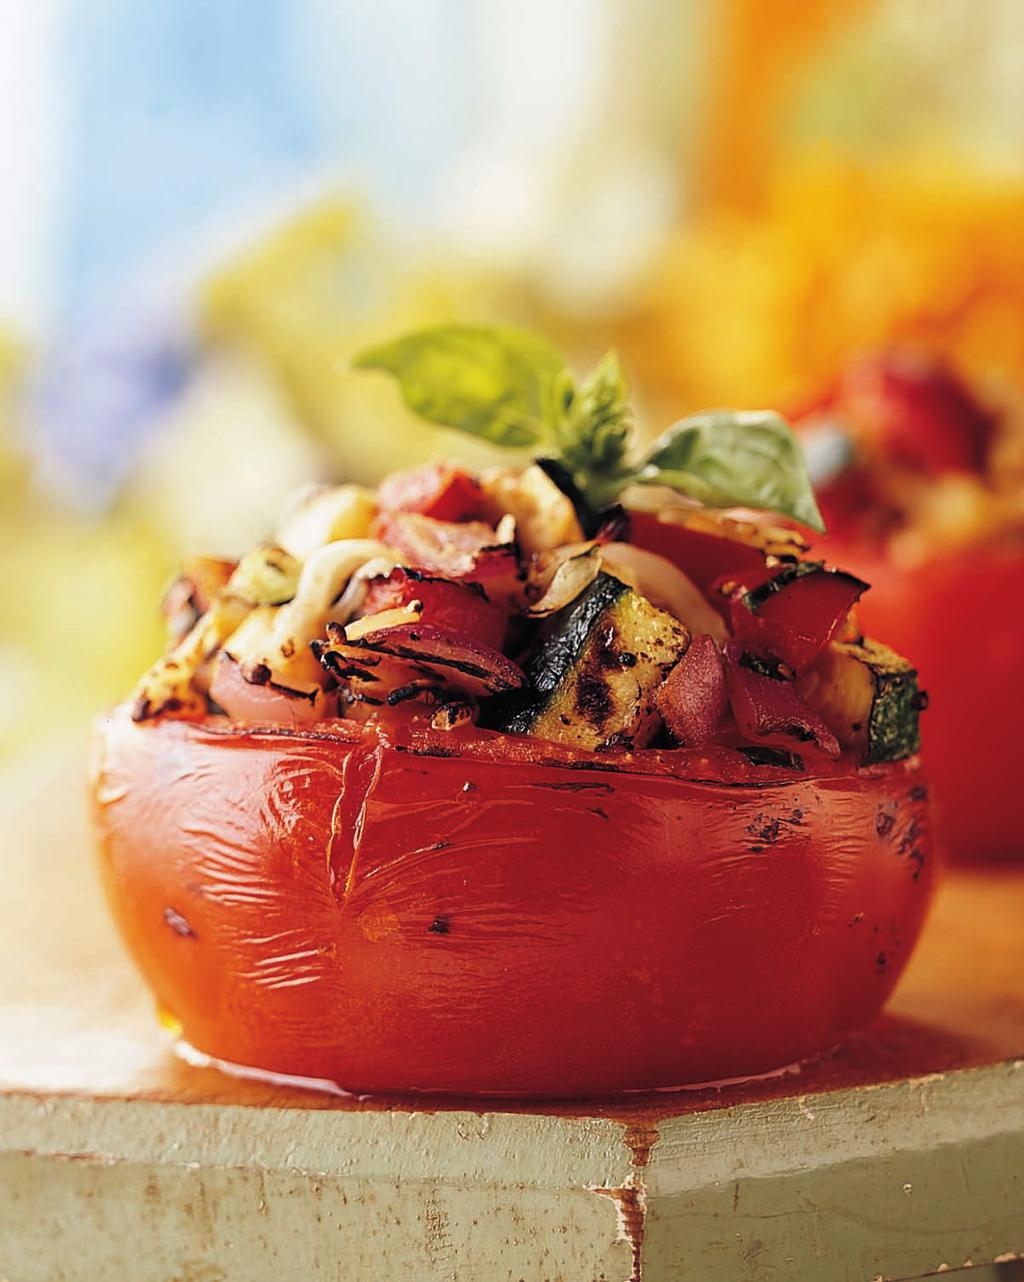 24 ROASTED TOMATOES STUFFED WITH